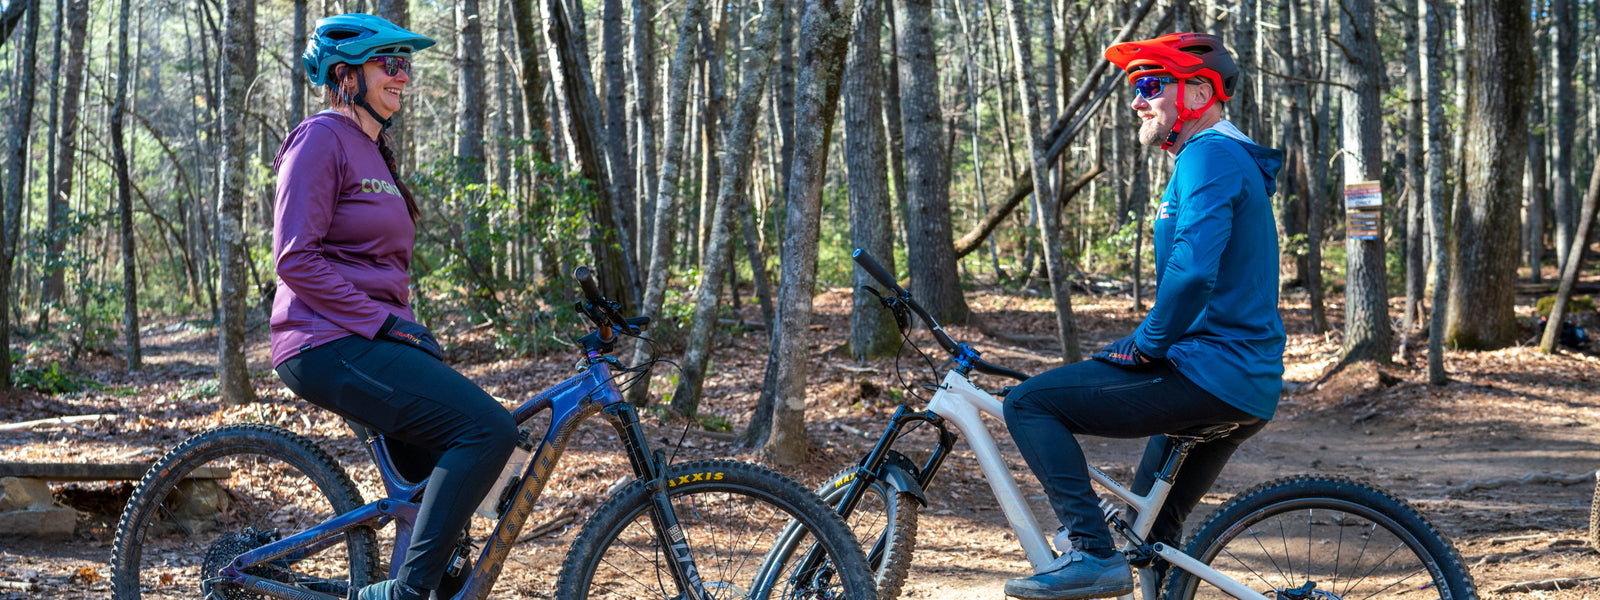 Long riding pants for tall people - The Hub - Mountain Biking Forums /  Message Boards - Vital MTB